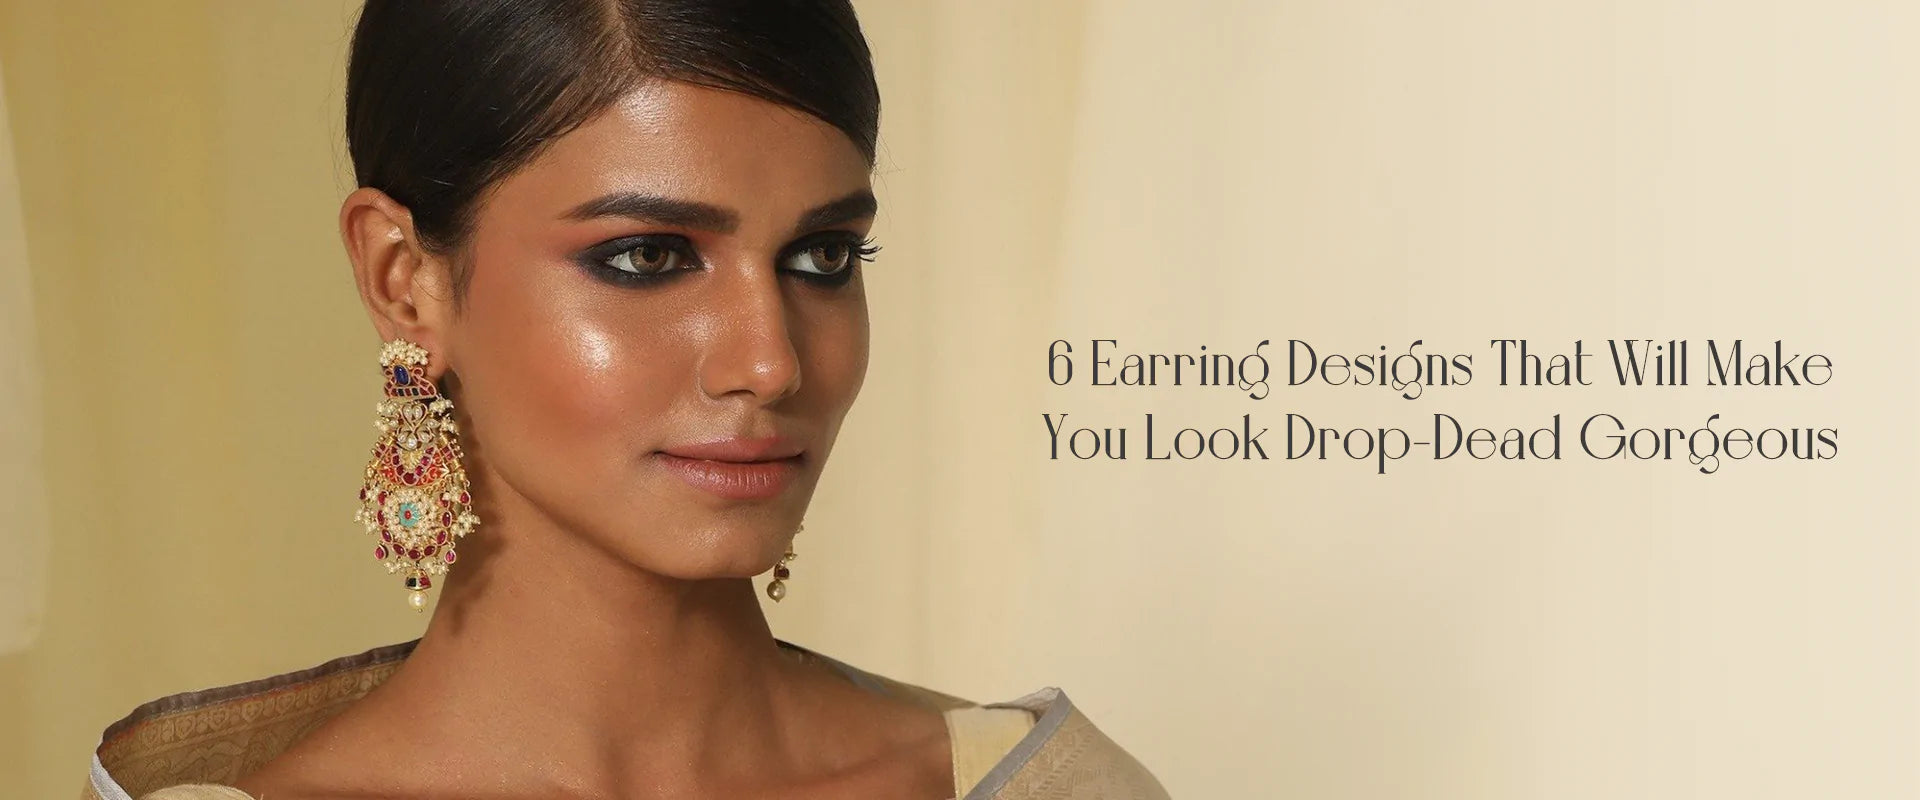 6 Earring Designs That Will Make You Look Drop-Dead Gorgeous